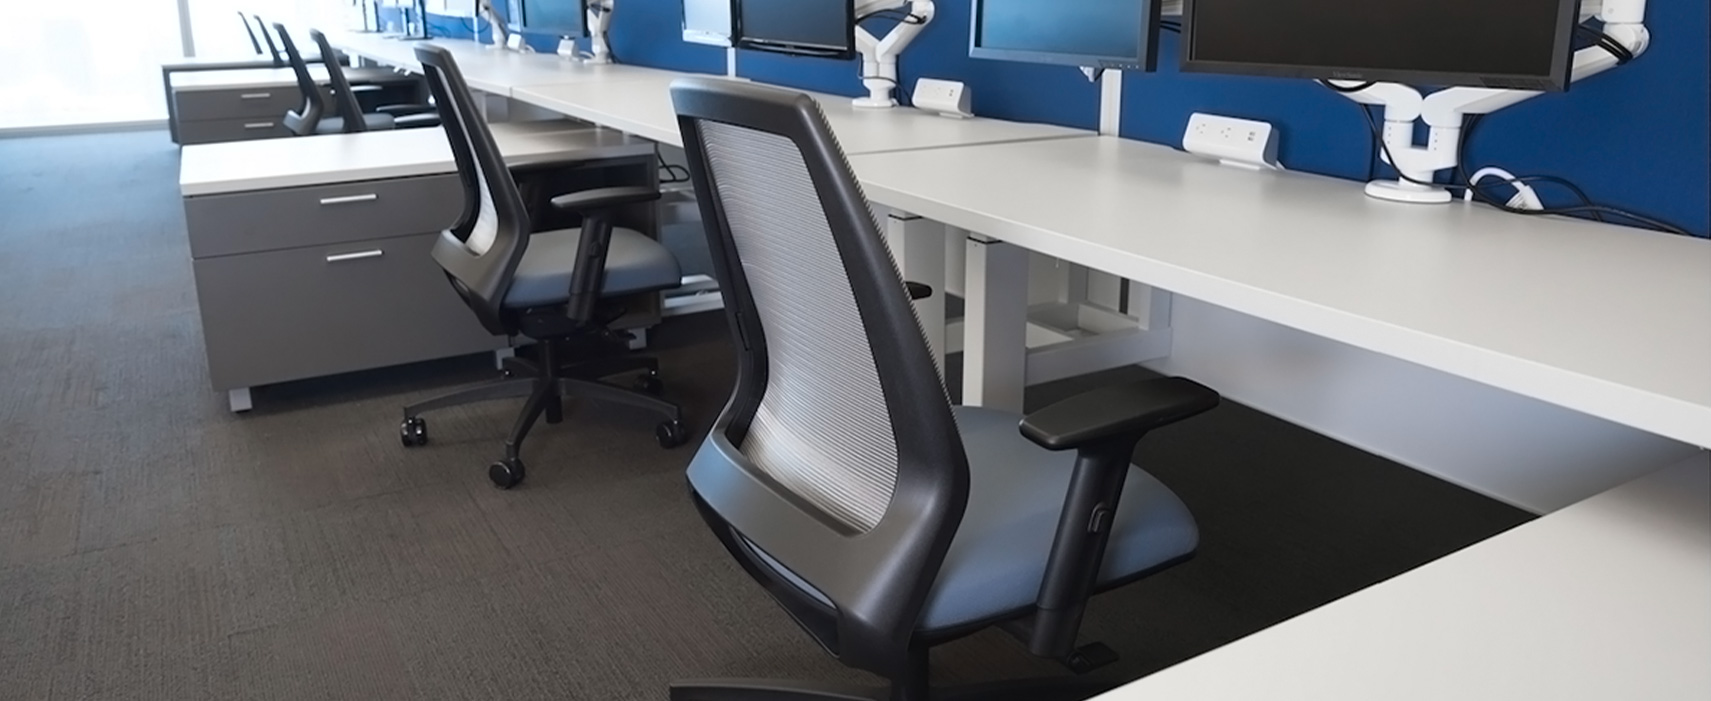 4u mesh back slim line seat work chairs in a medium sized office. (Photo: Rightsize Facility)